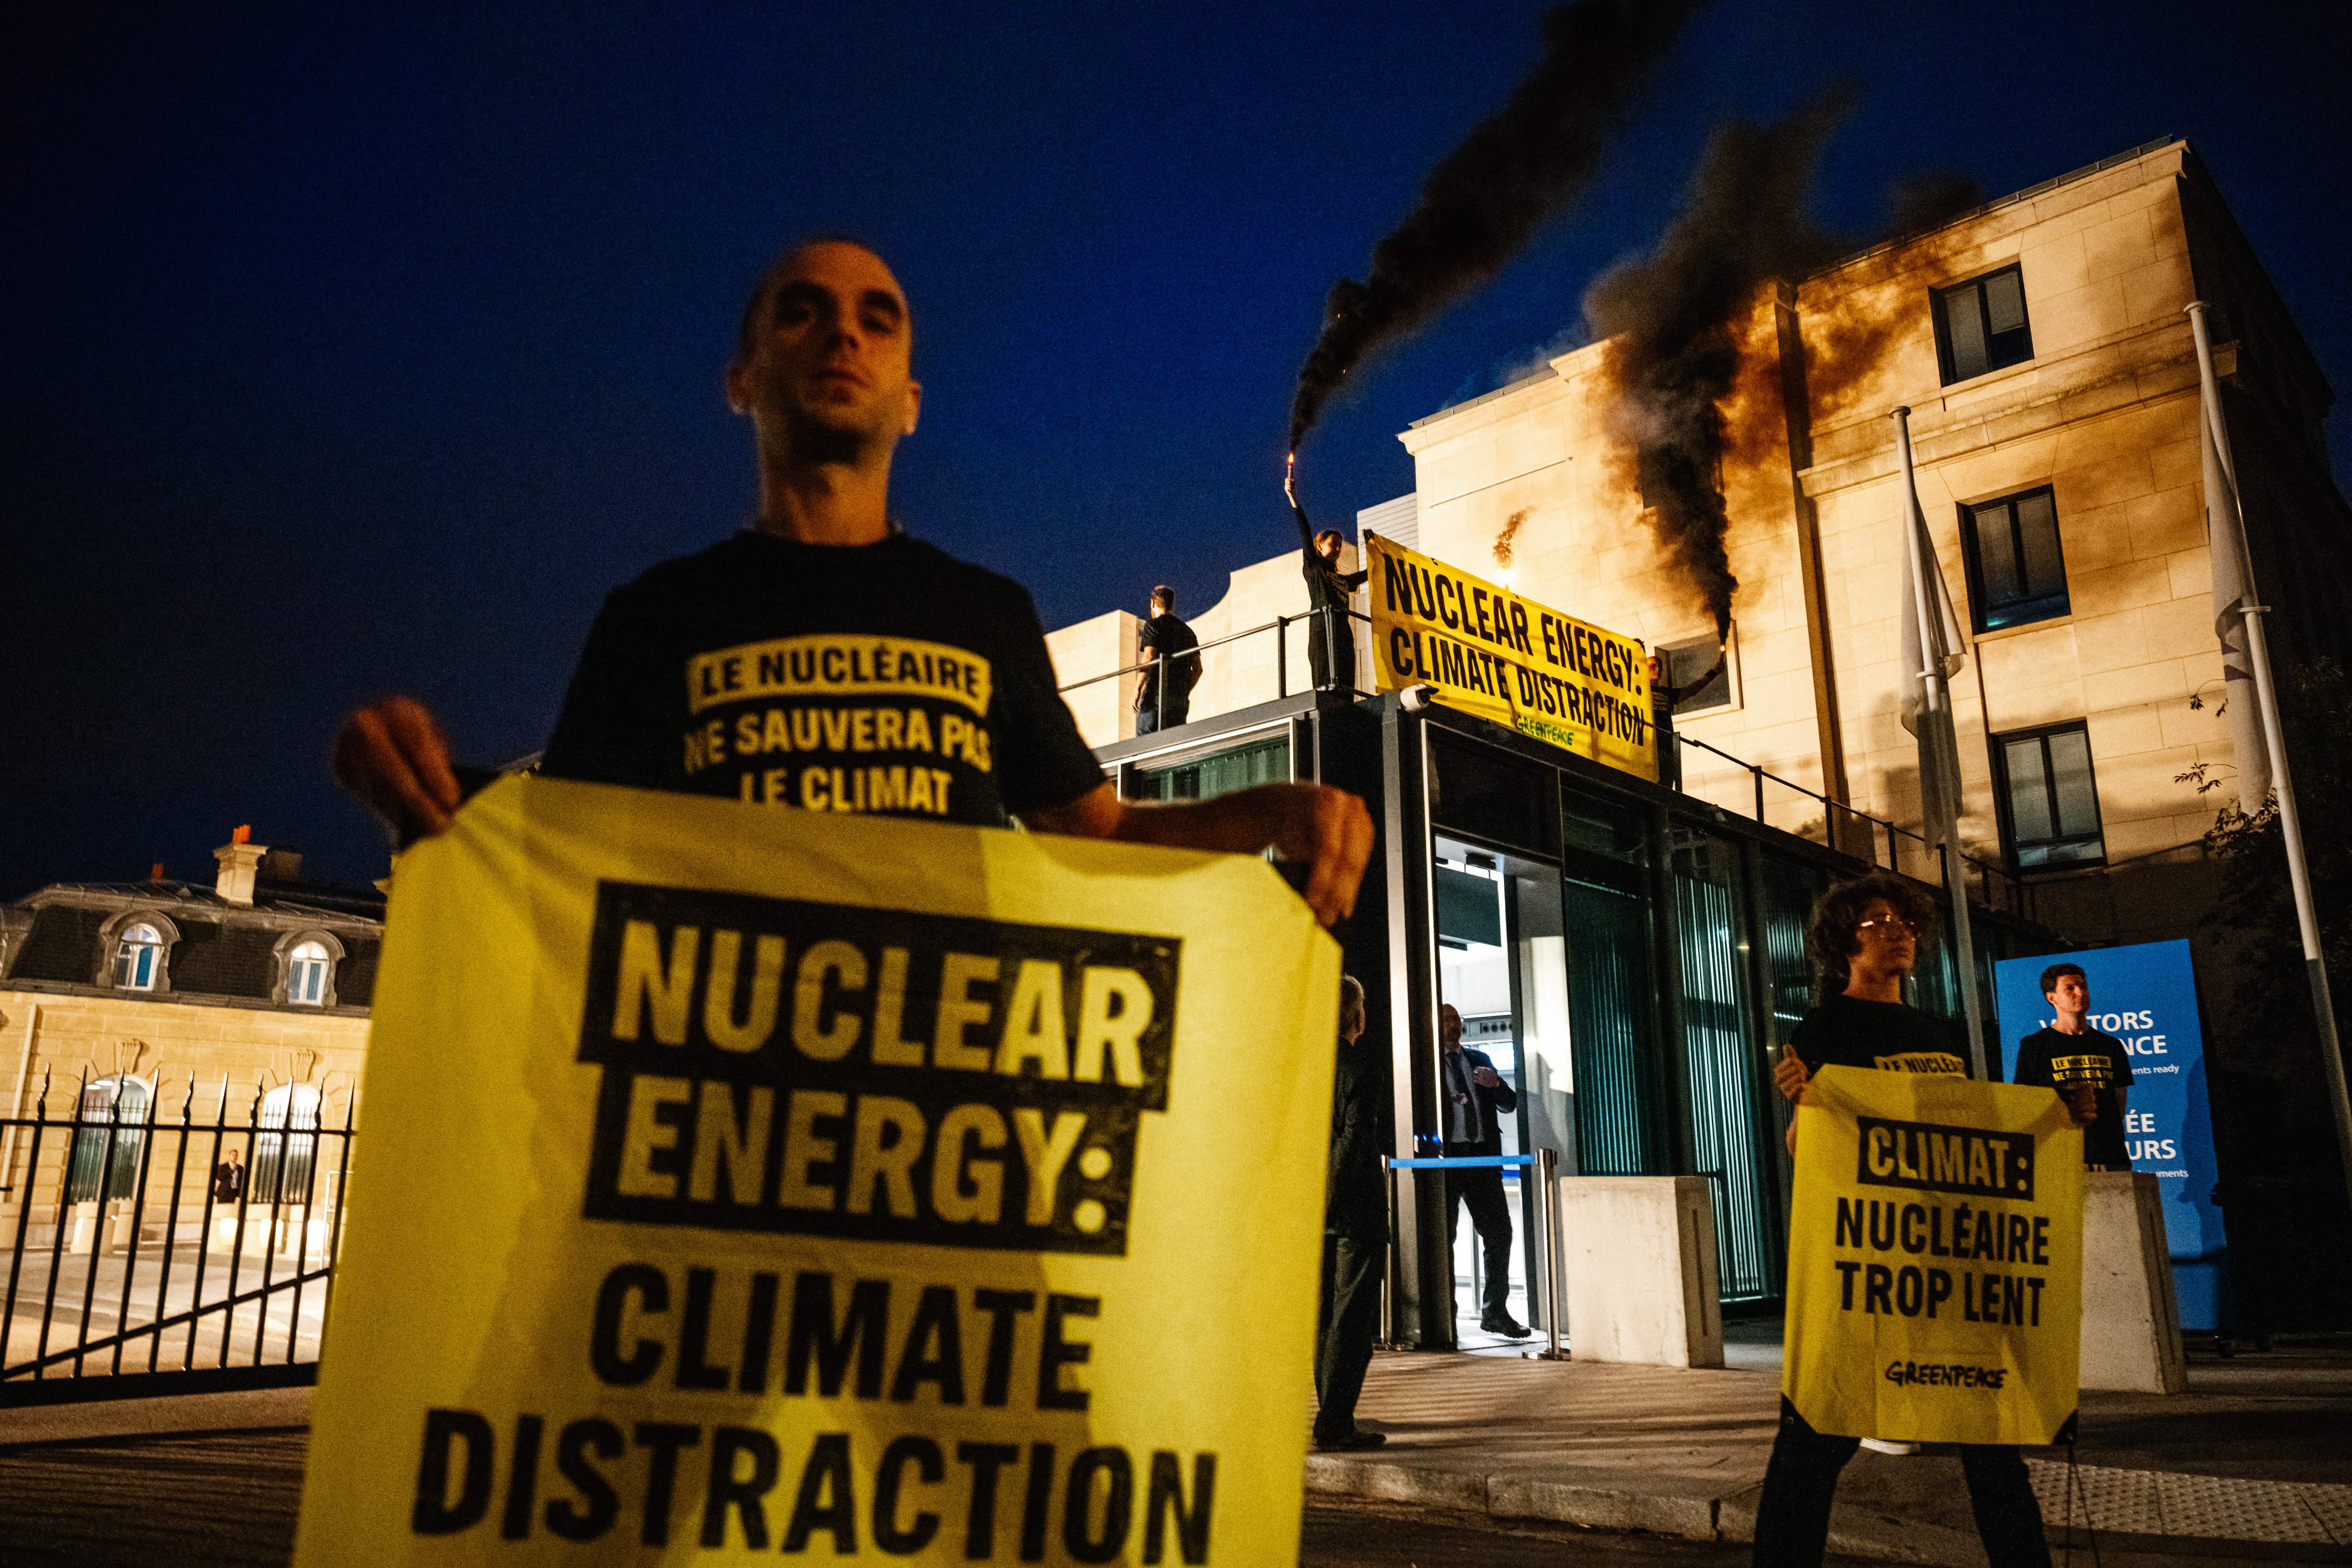 Greenpeace activists light torches and hold anti-nuclear banners prior to the opening of a nuclear energy conference in Germany in September